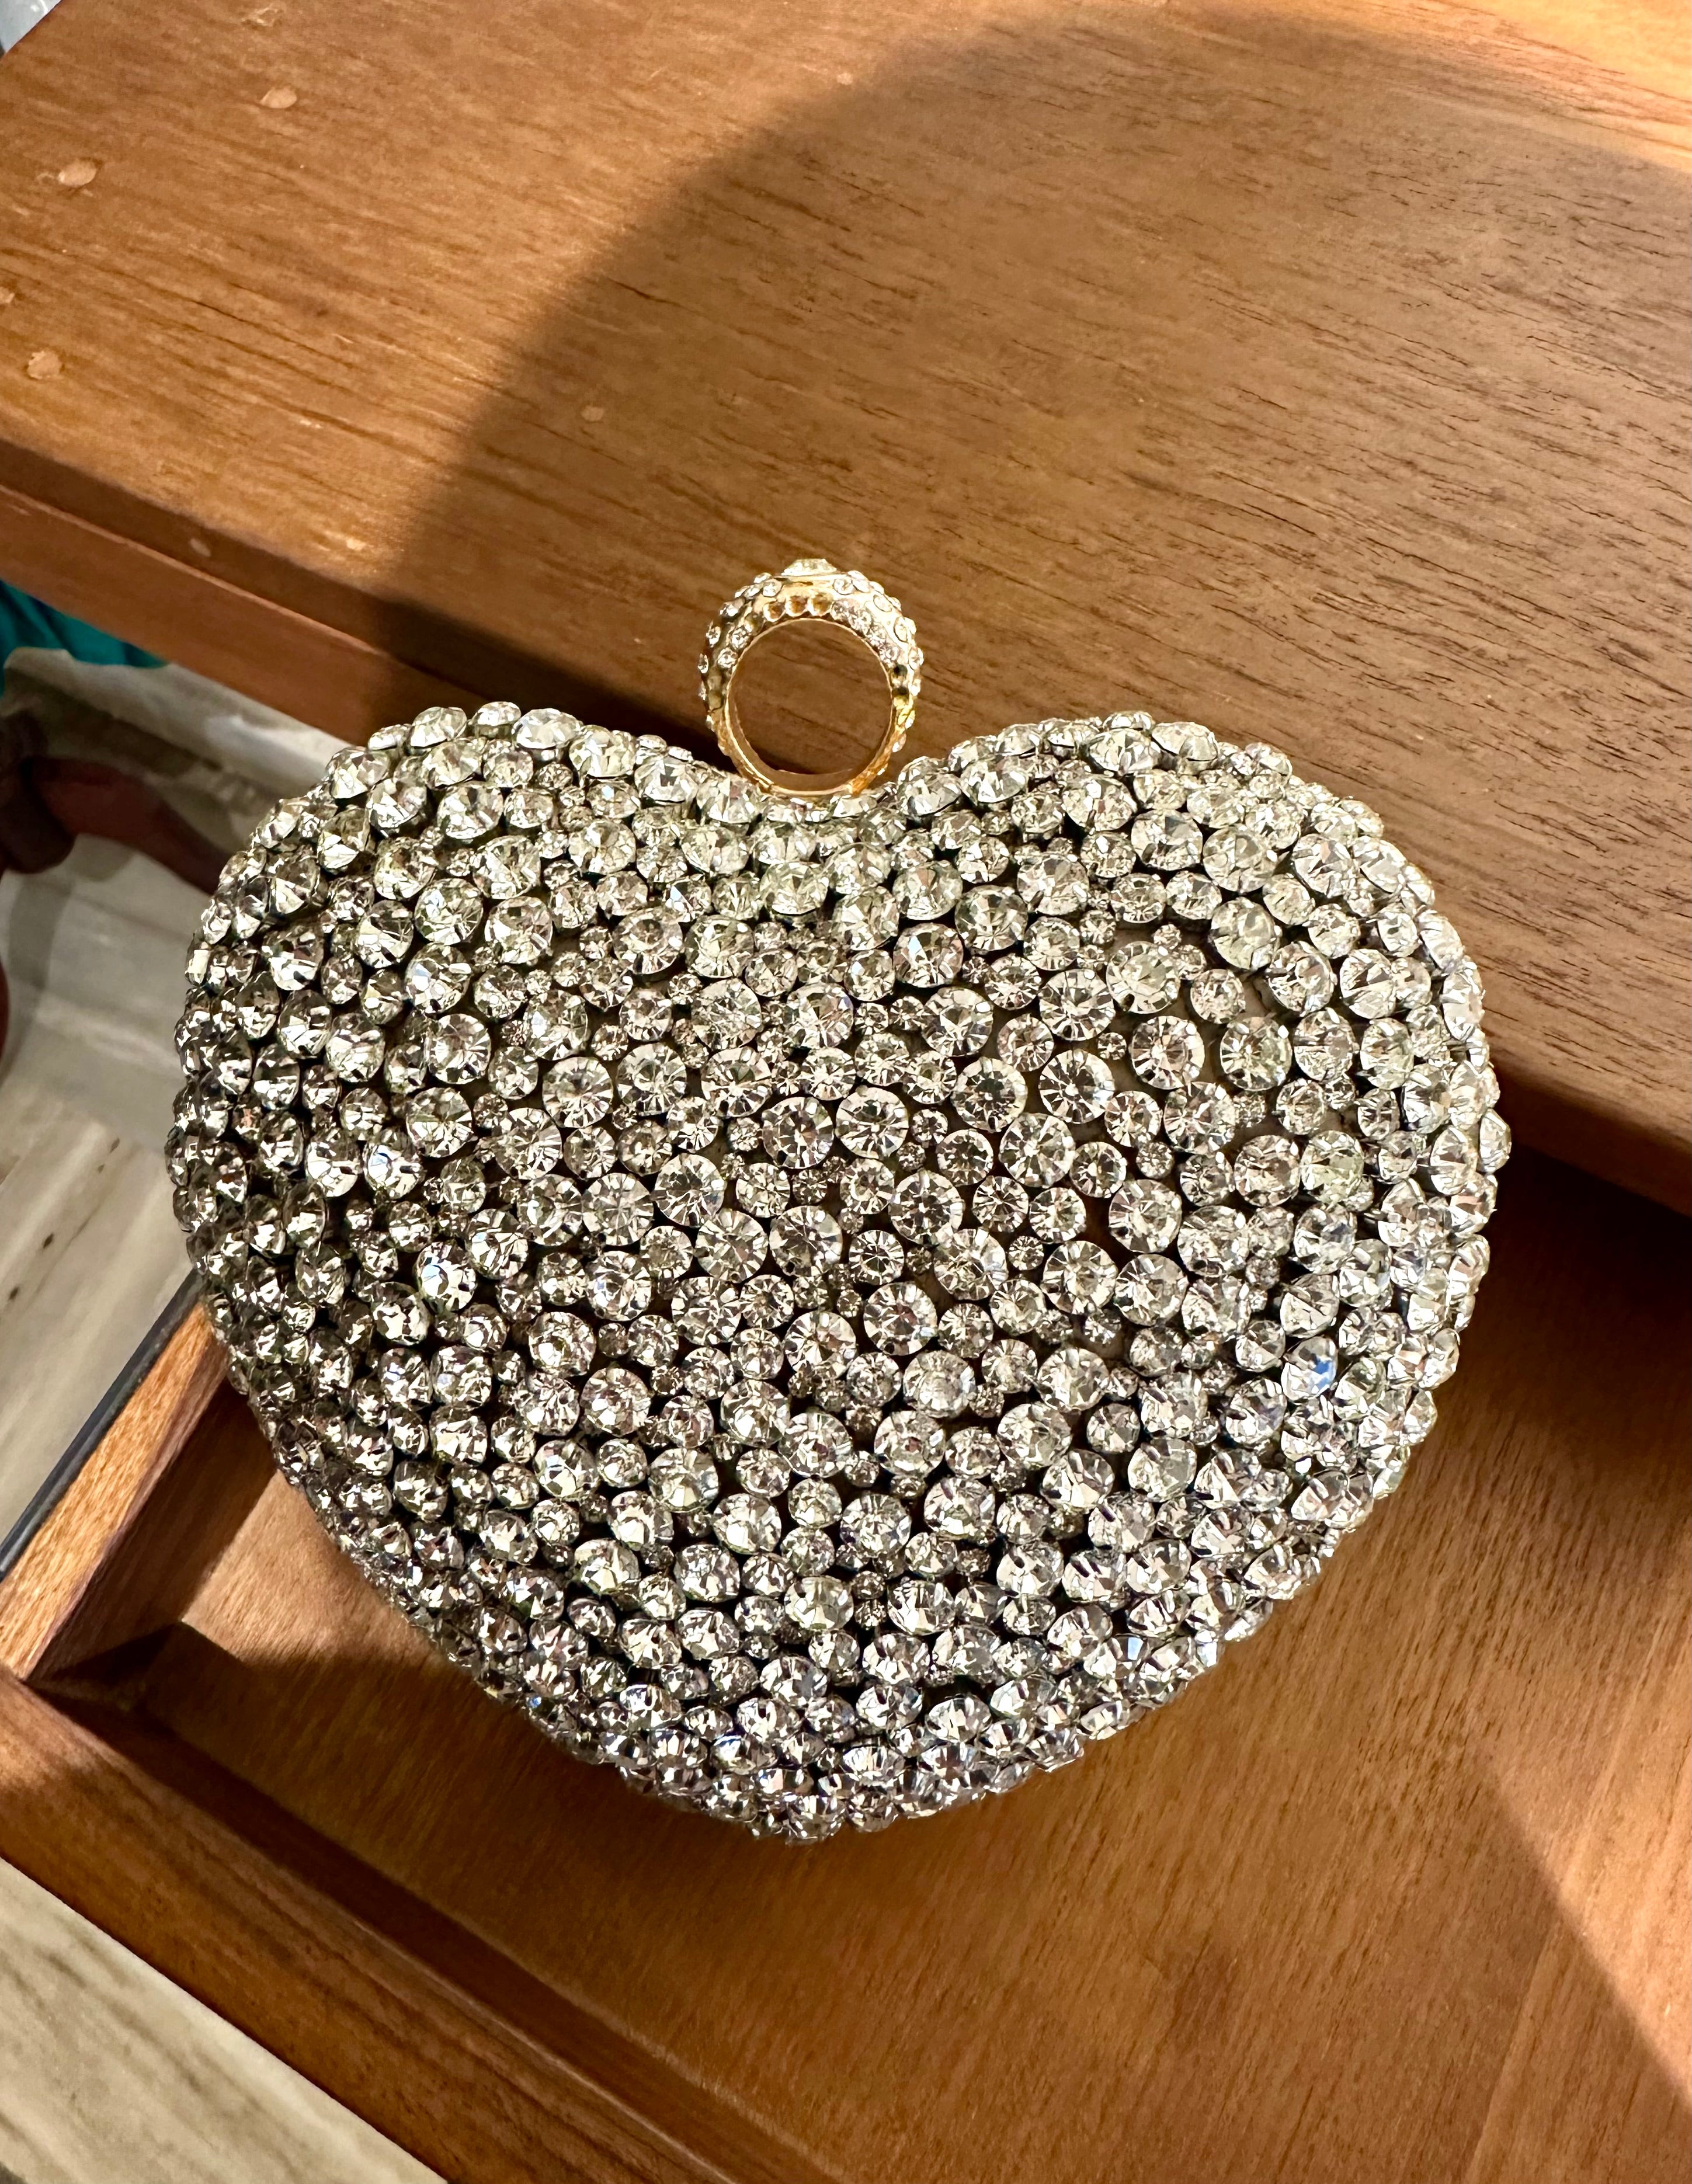 Heart frame clutch bag with chain handle